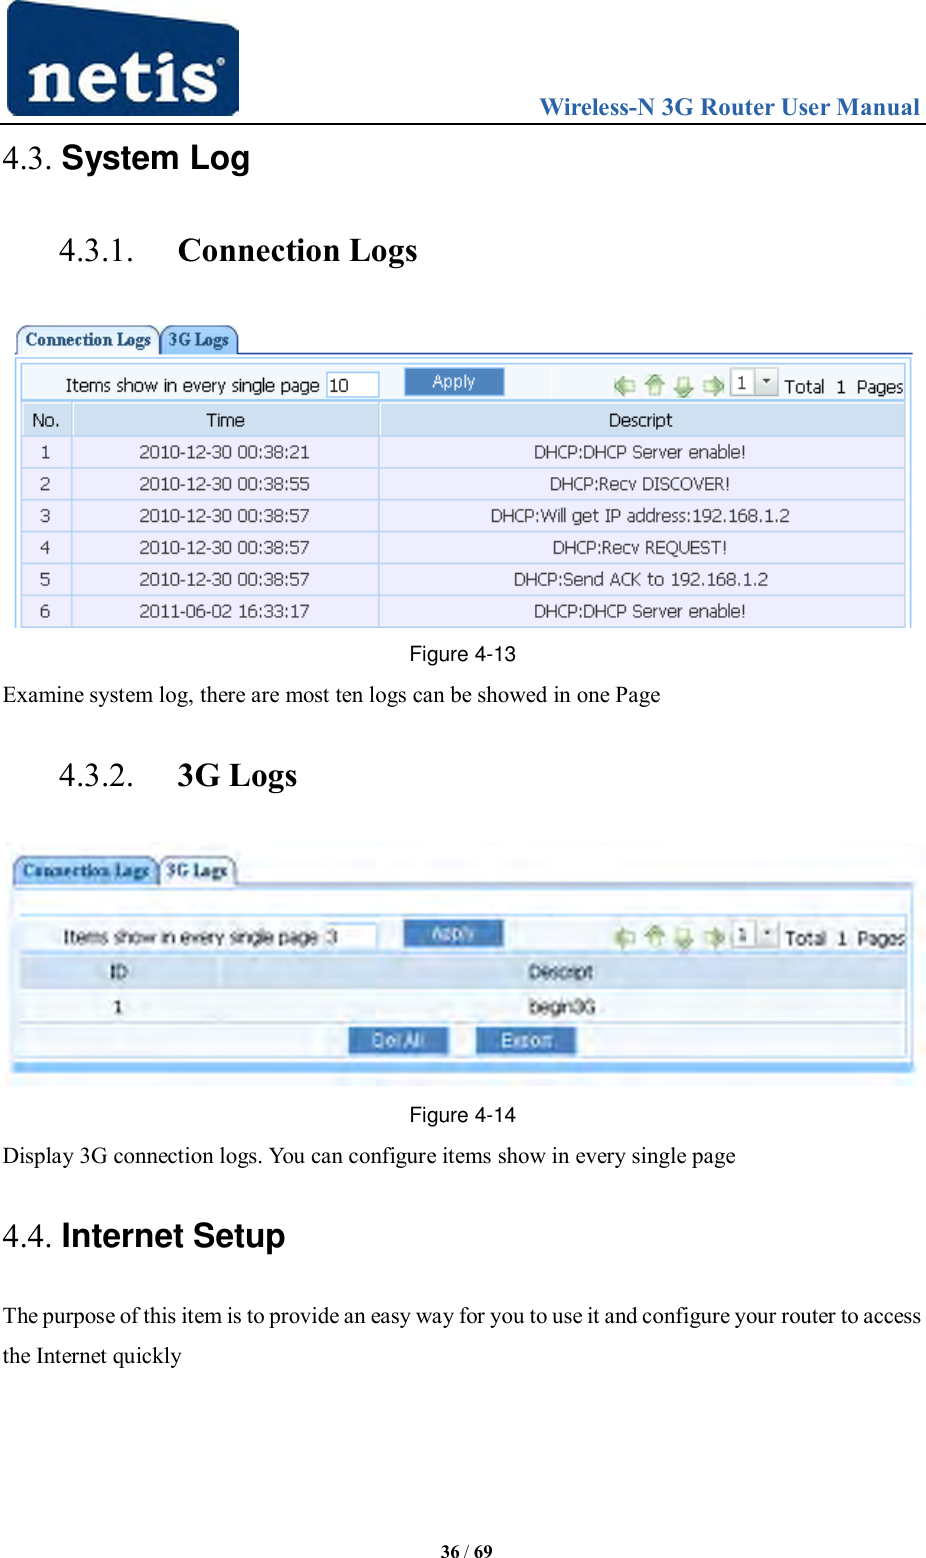                                 Wireless-N 3G Router User Manual  36 / 69 4.3. System Log 4.3.1. Connection Logs  Figure 4-13 Examine system log, there are most ten logs can be showed in one Page 4.3.2. 3G Logs  Figure 4-14 Display 3G connection logs. You can configure items show in every single page 4.4. Internet Setup The purpose of this item is to provide an easy way for you to use it and configure your router to access the Internet quickly 